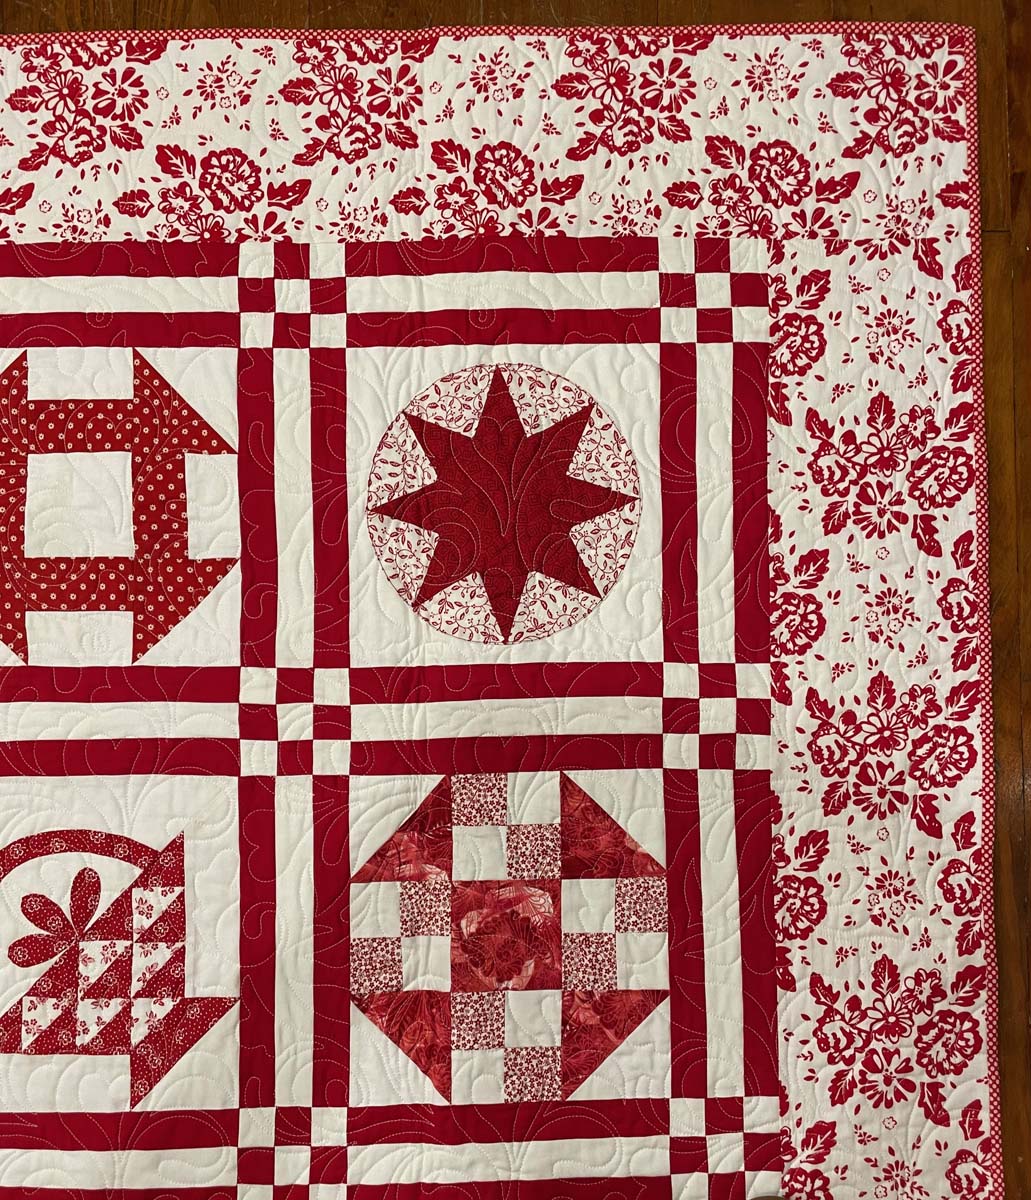 Quilting Terms: Quilting, Borders and Sashing